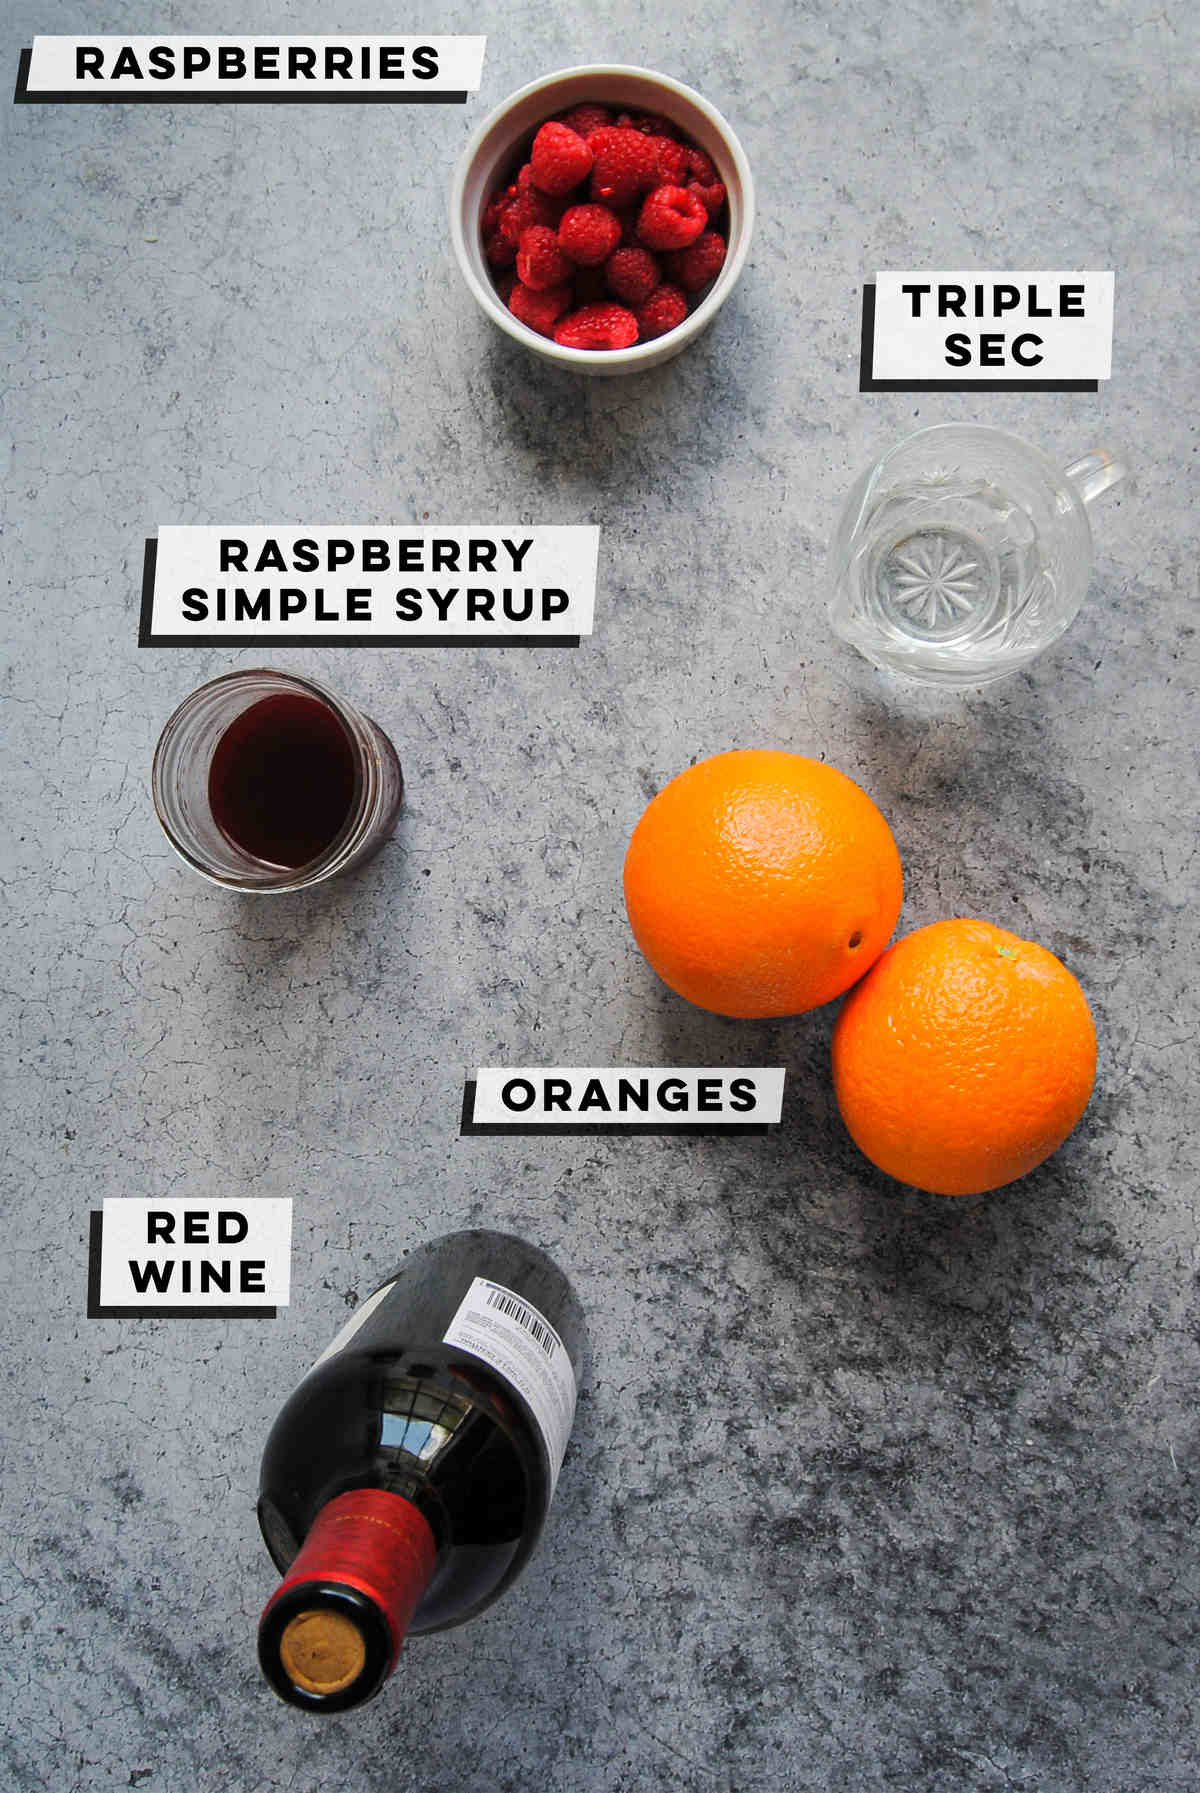 fresh raspberries, triple sec, raspberry simple syrup, 2 oranges, and a bottle of red wine